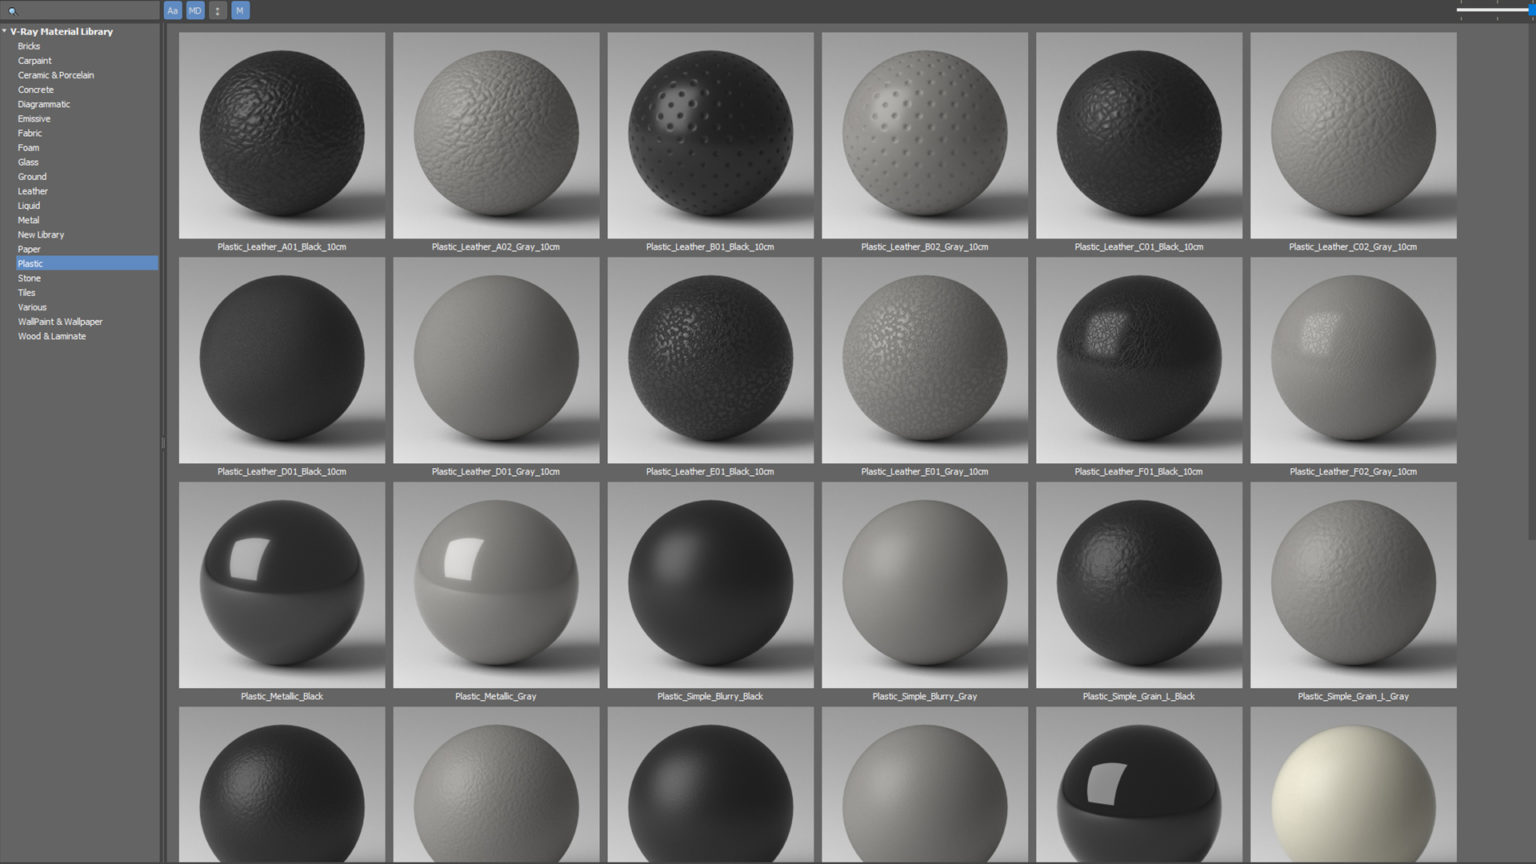 3ds max vray material library download